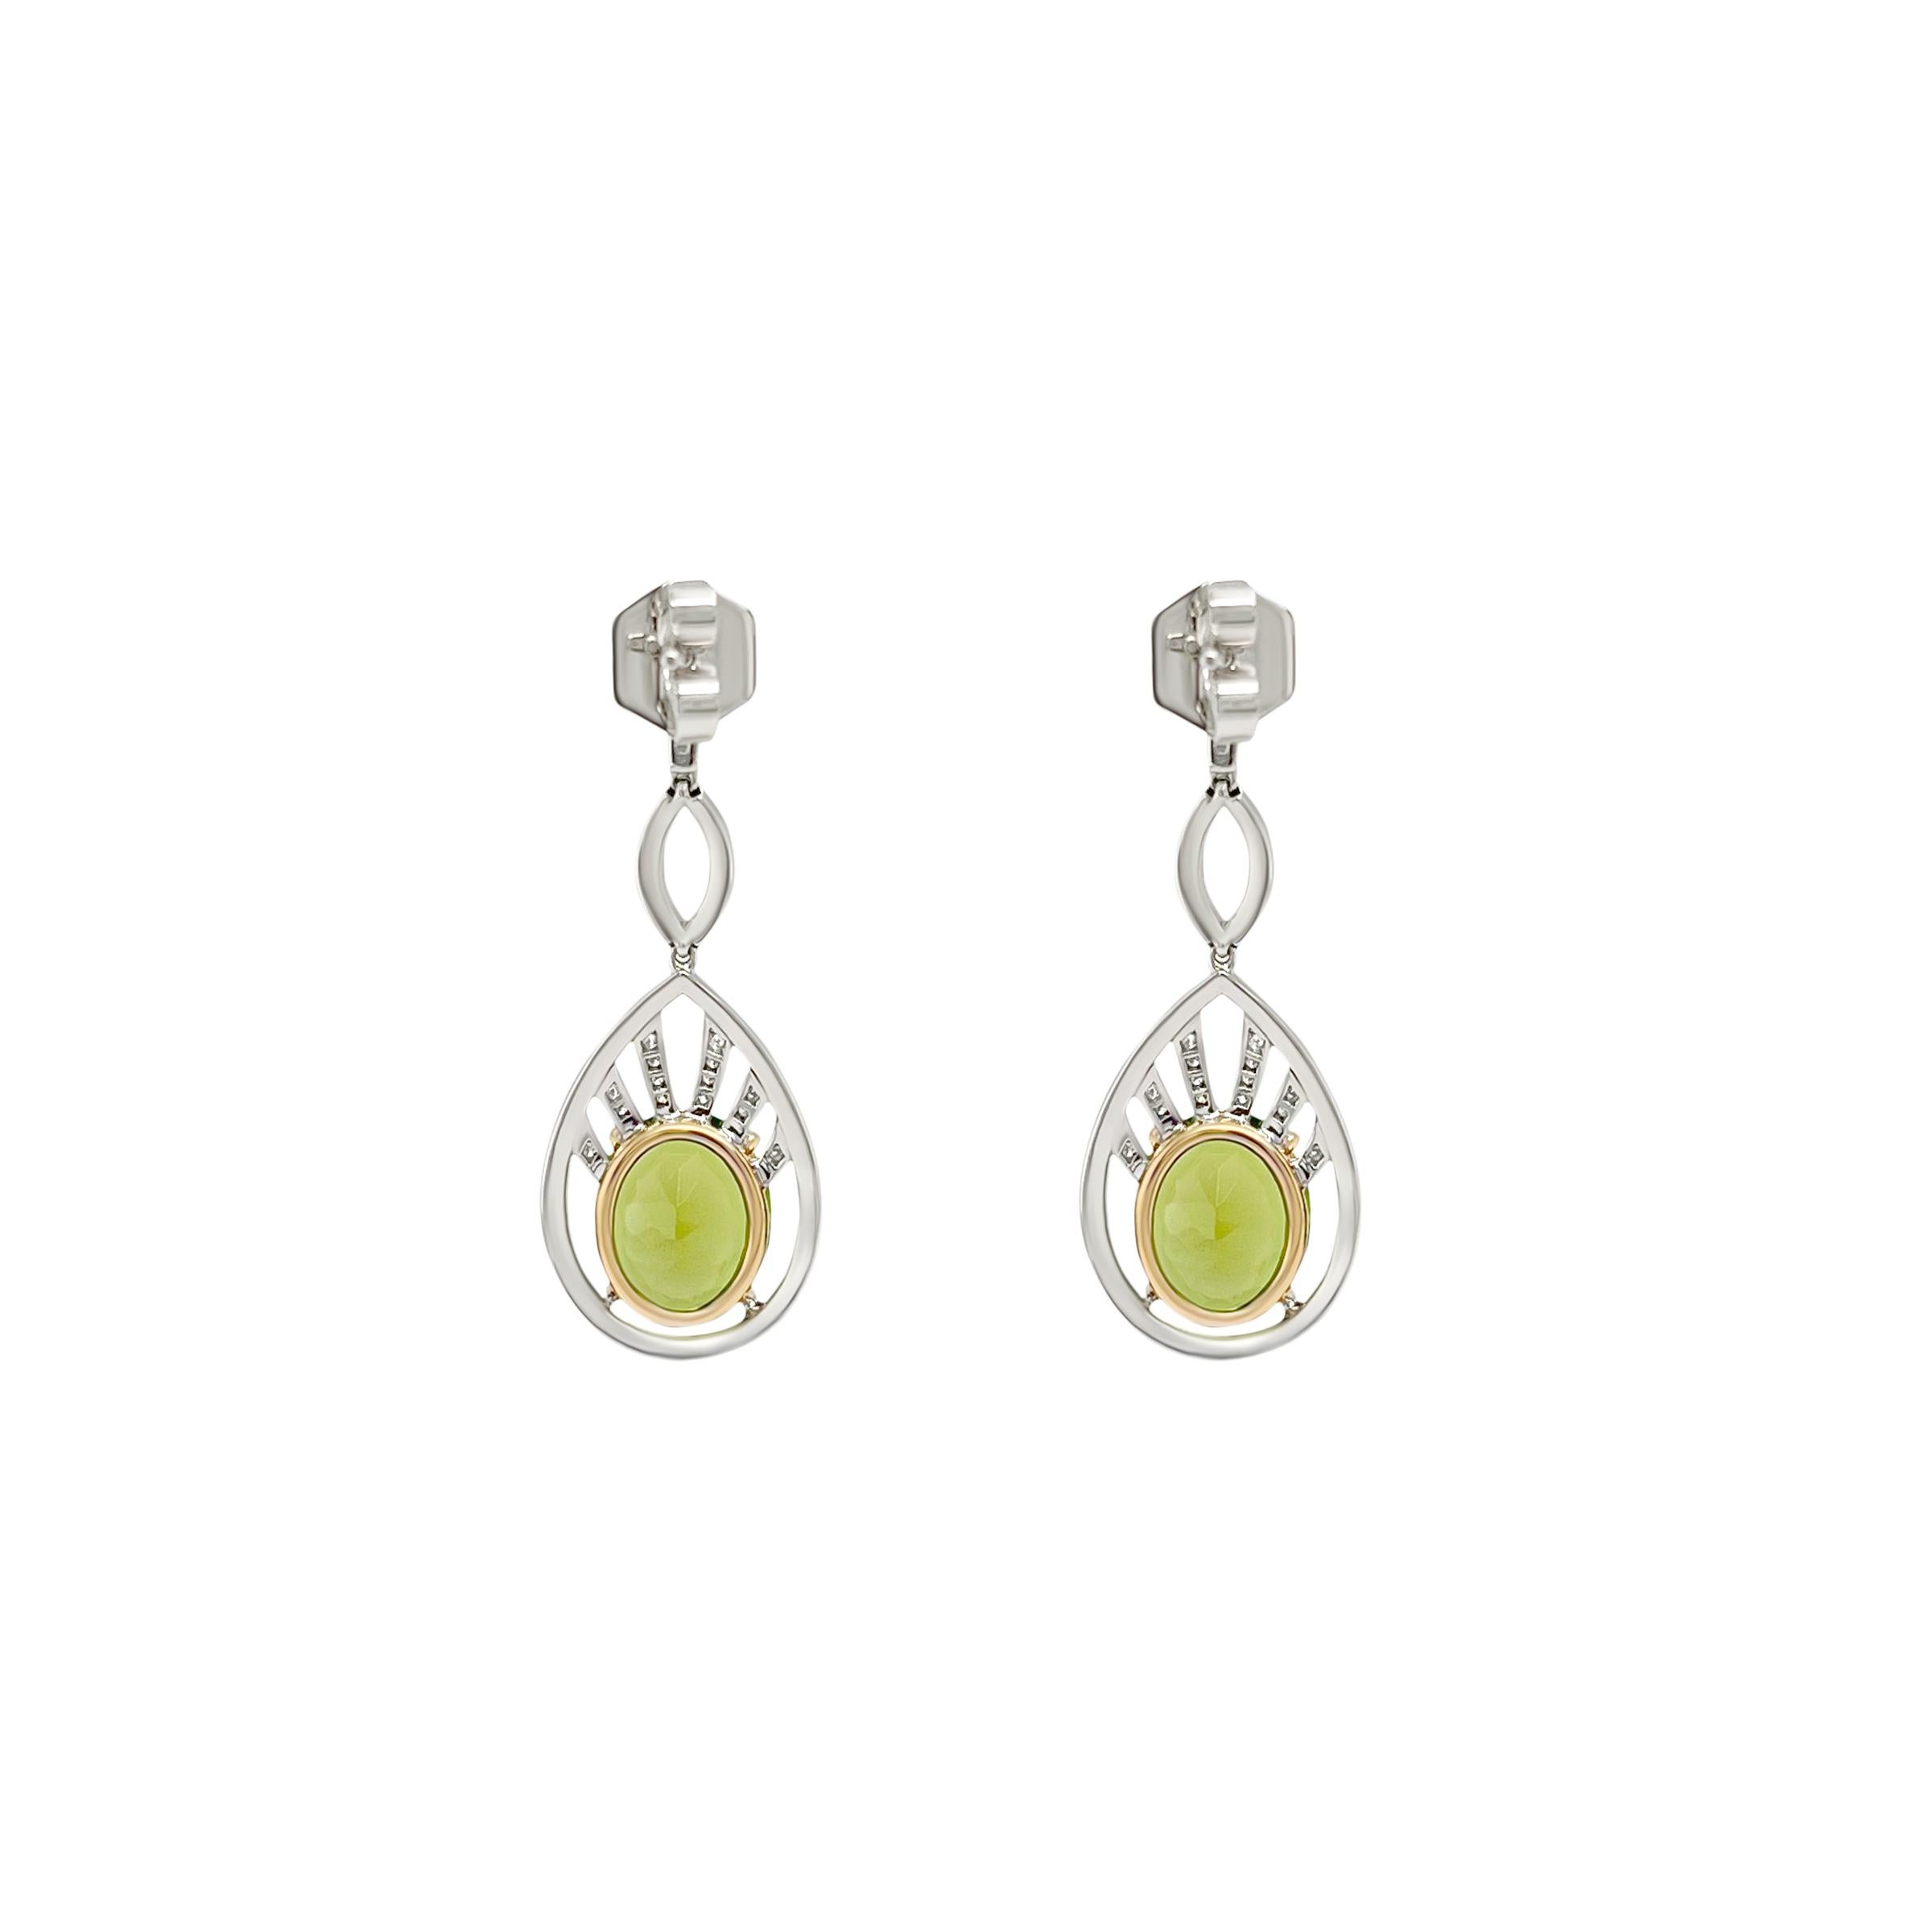 These natural 8.19ct peridot earrings show off their vibrant  green color. Completely eye clean and loupe clean these high quality peridots are combined with a sparkling diamond shield. We use top quality diamonds. The dangle design of the earrings